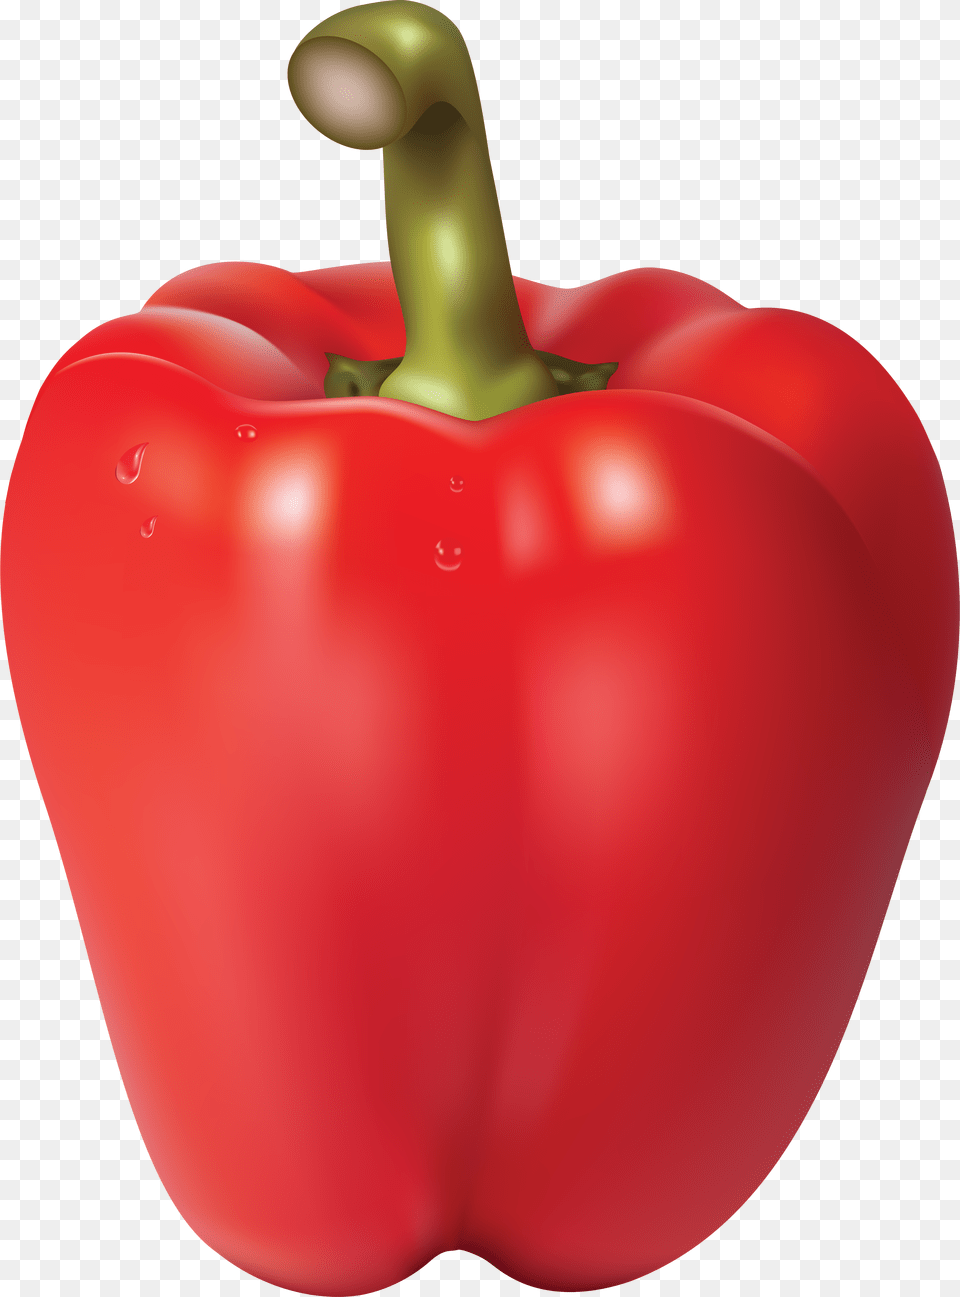 Bell Pepper Chili Pepper Red Pepper Background, Bell Pepper, Food, Plant, Produce Free Transparent Png